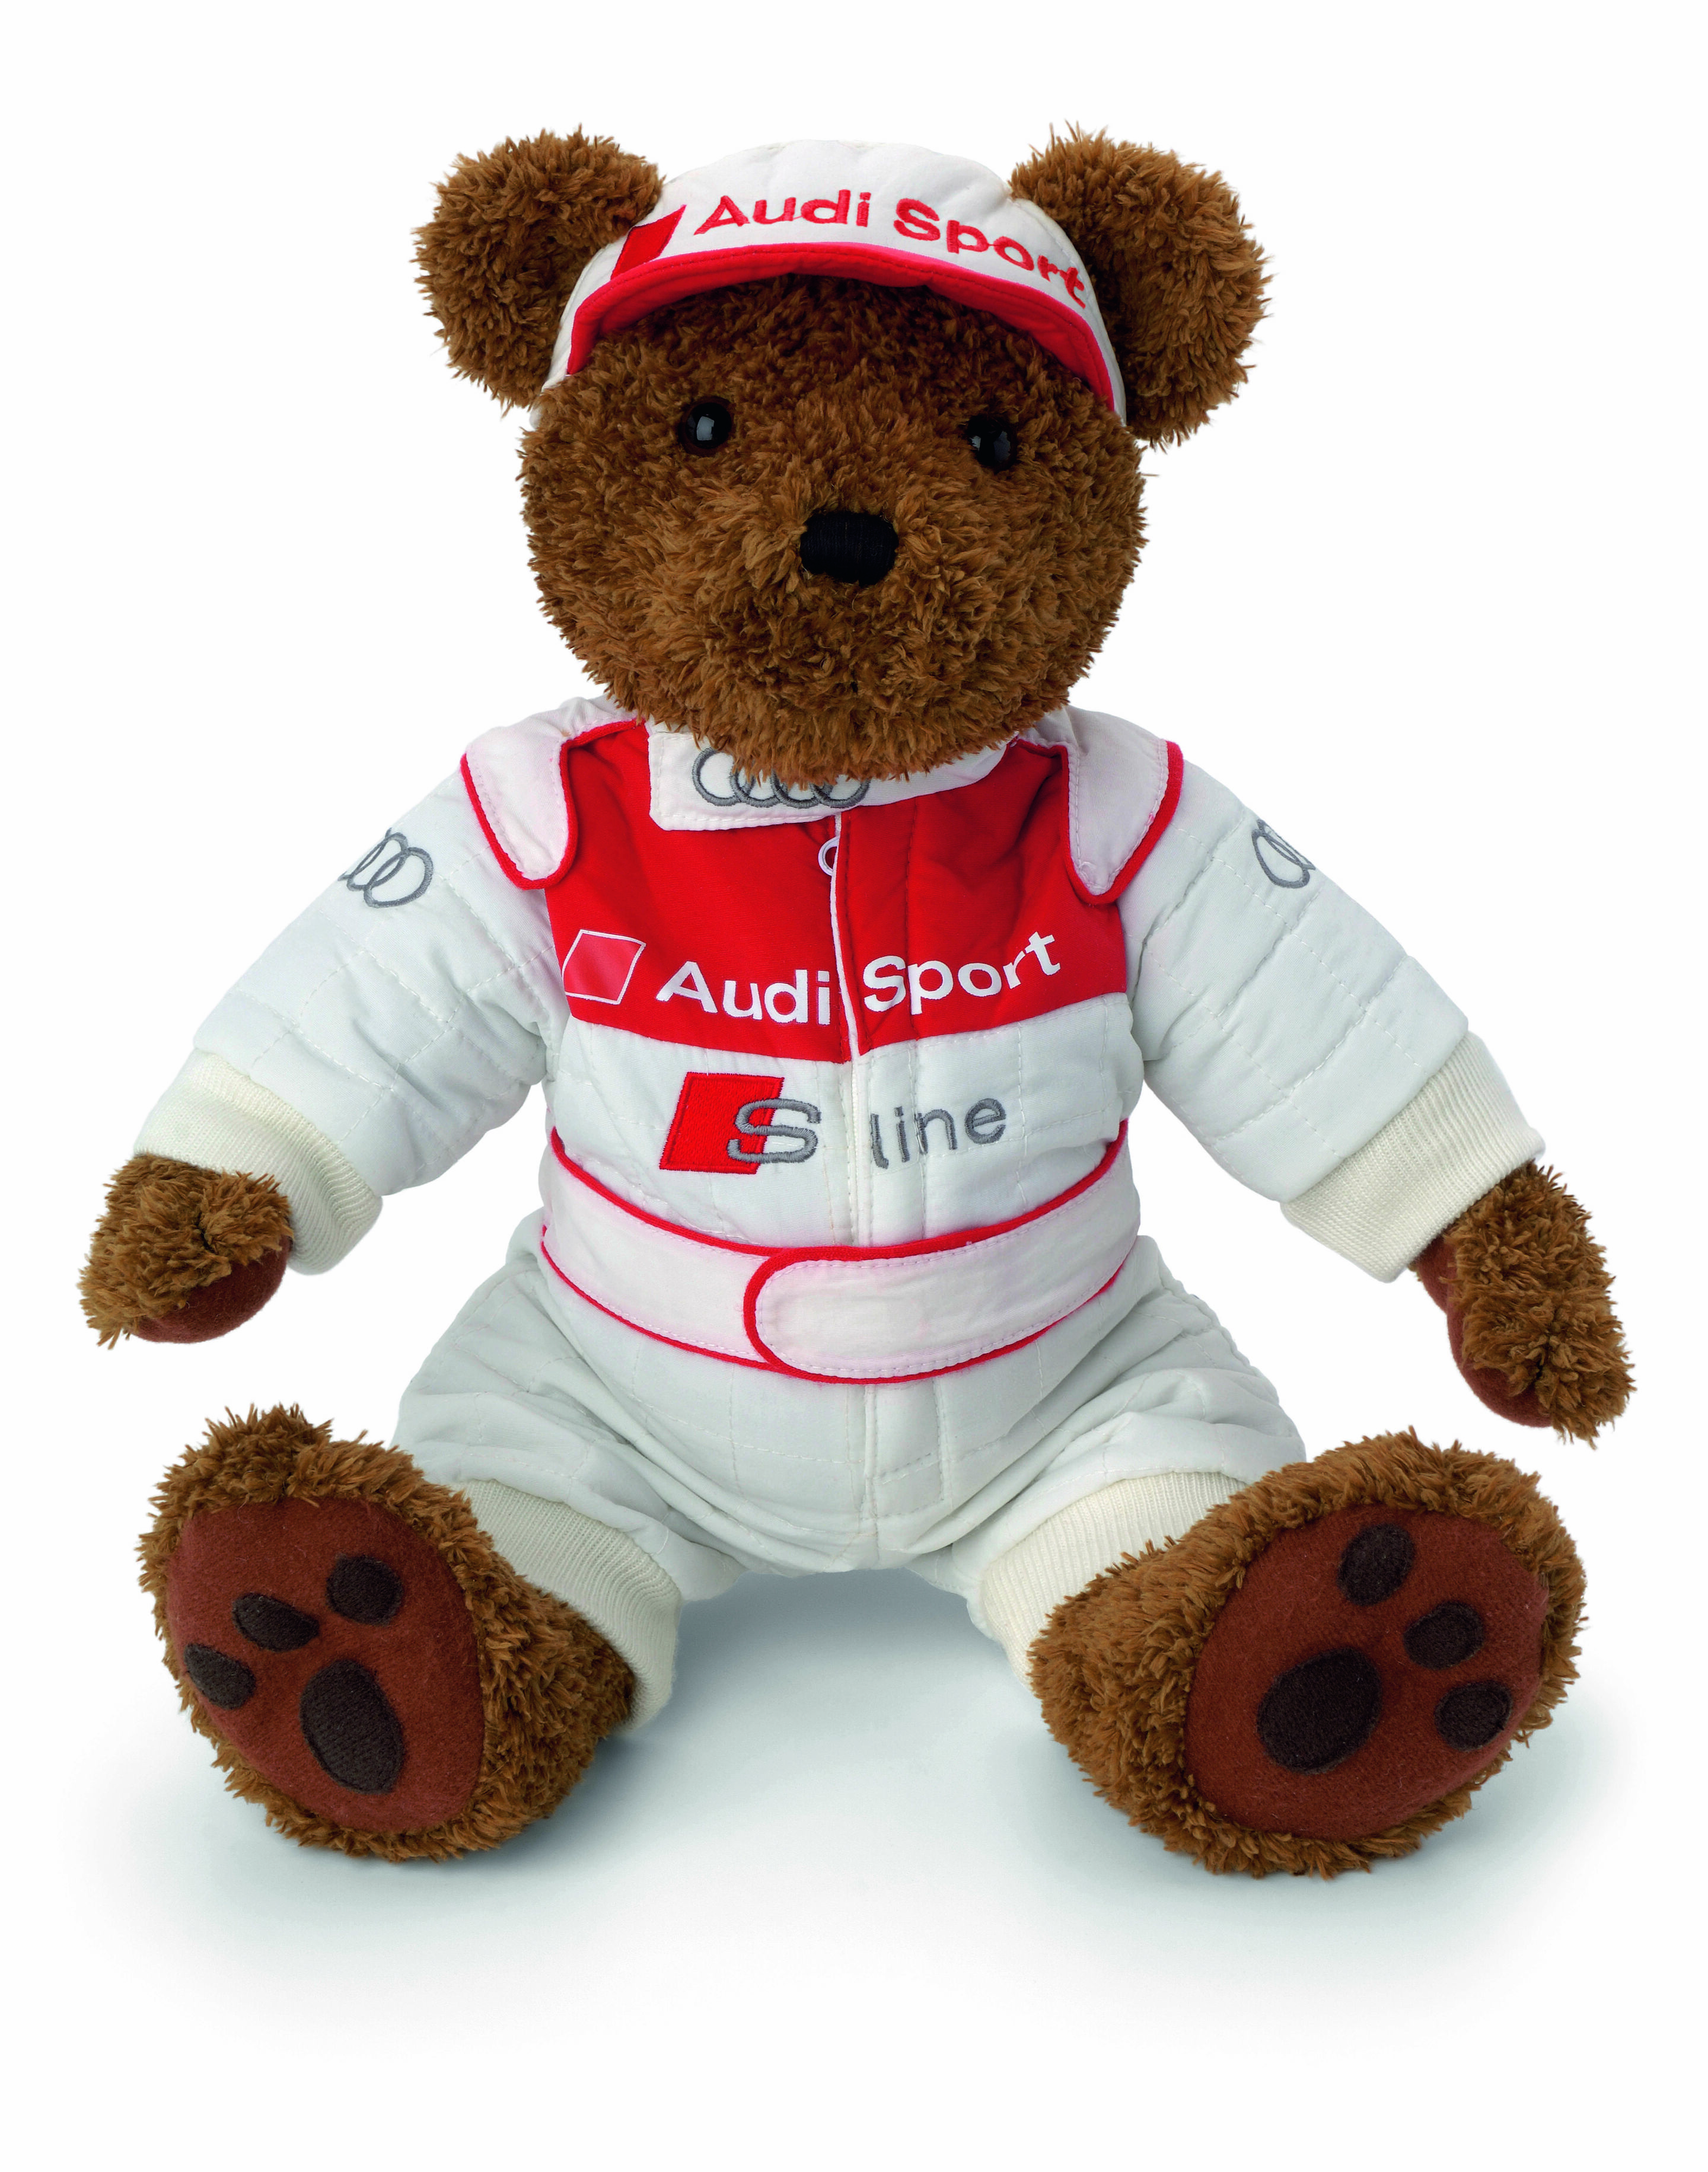 Audi subsidiary Quattro GmbH is also showing the motorsport teddy bear.